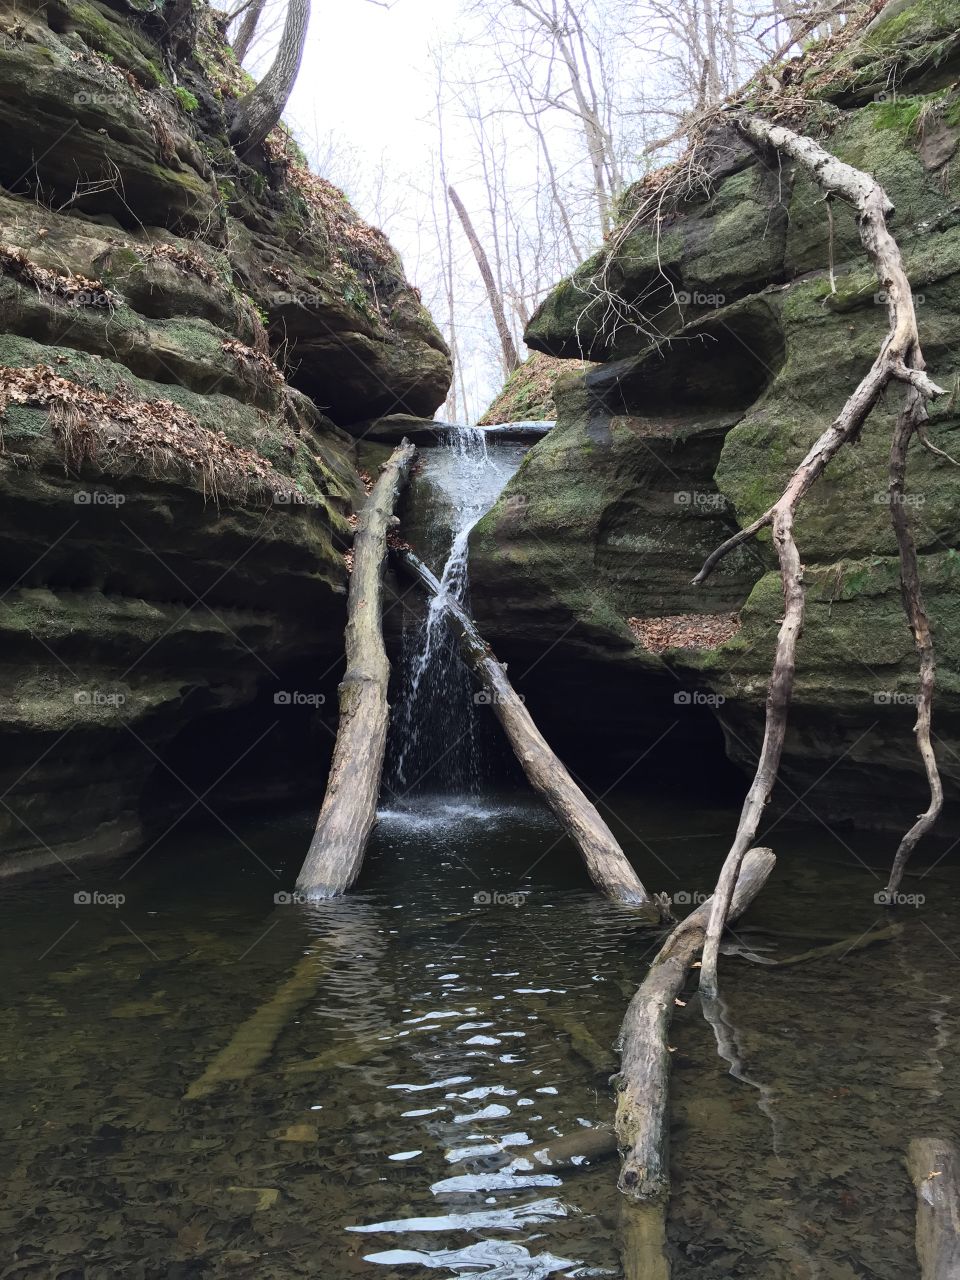 Fallen branches and pool of water under sandstone rock formations at starved rock park in Illinois 